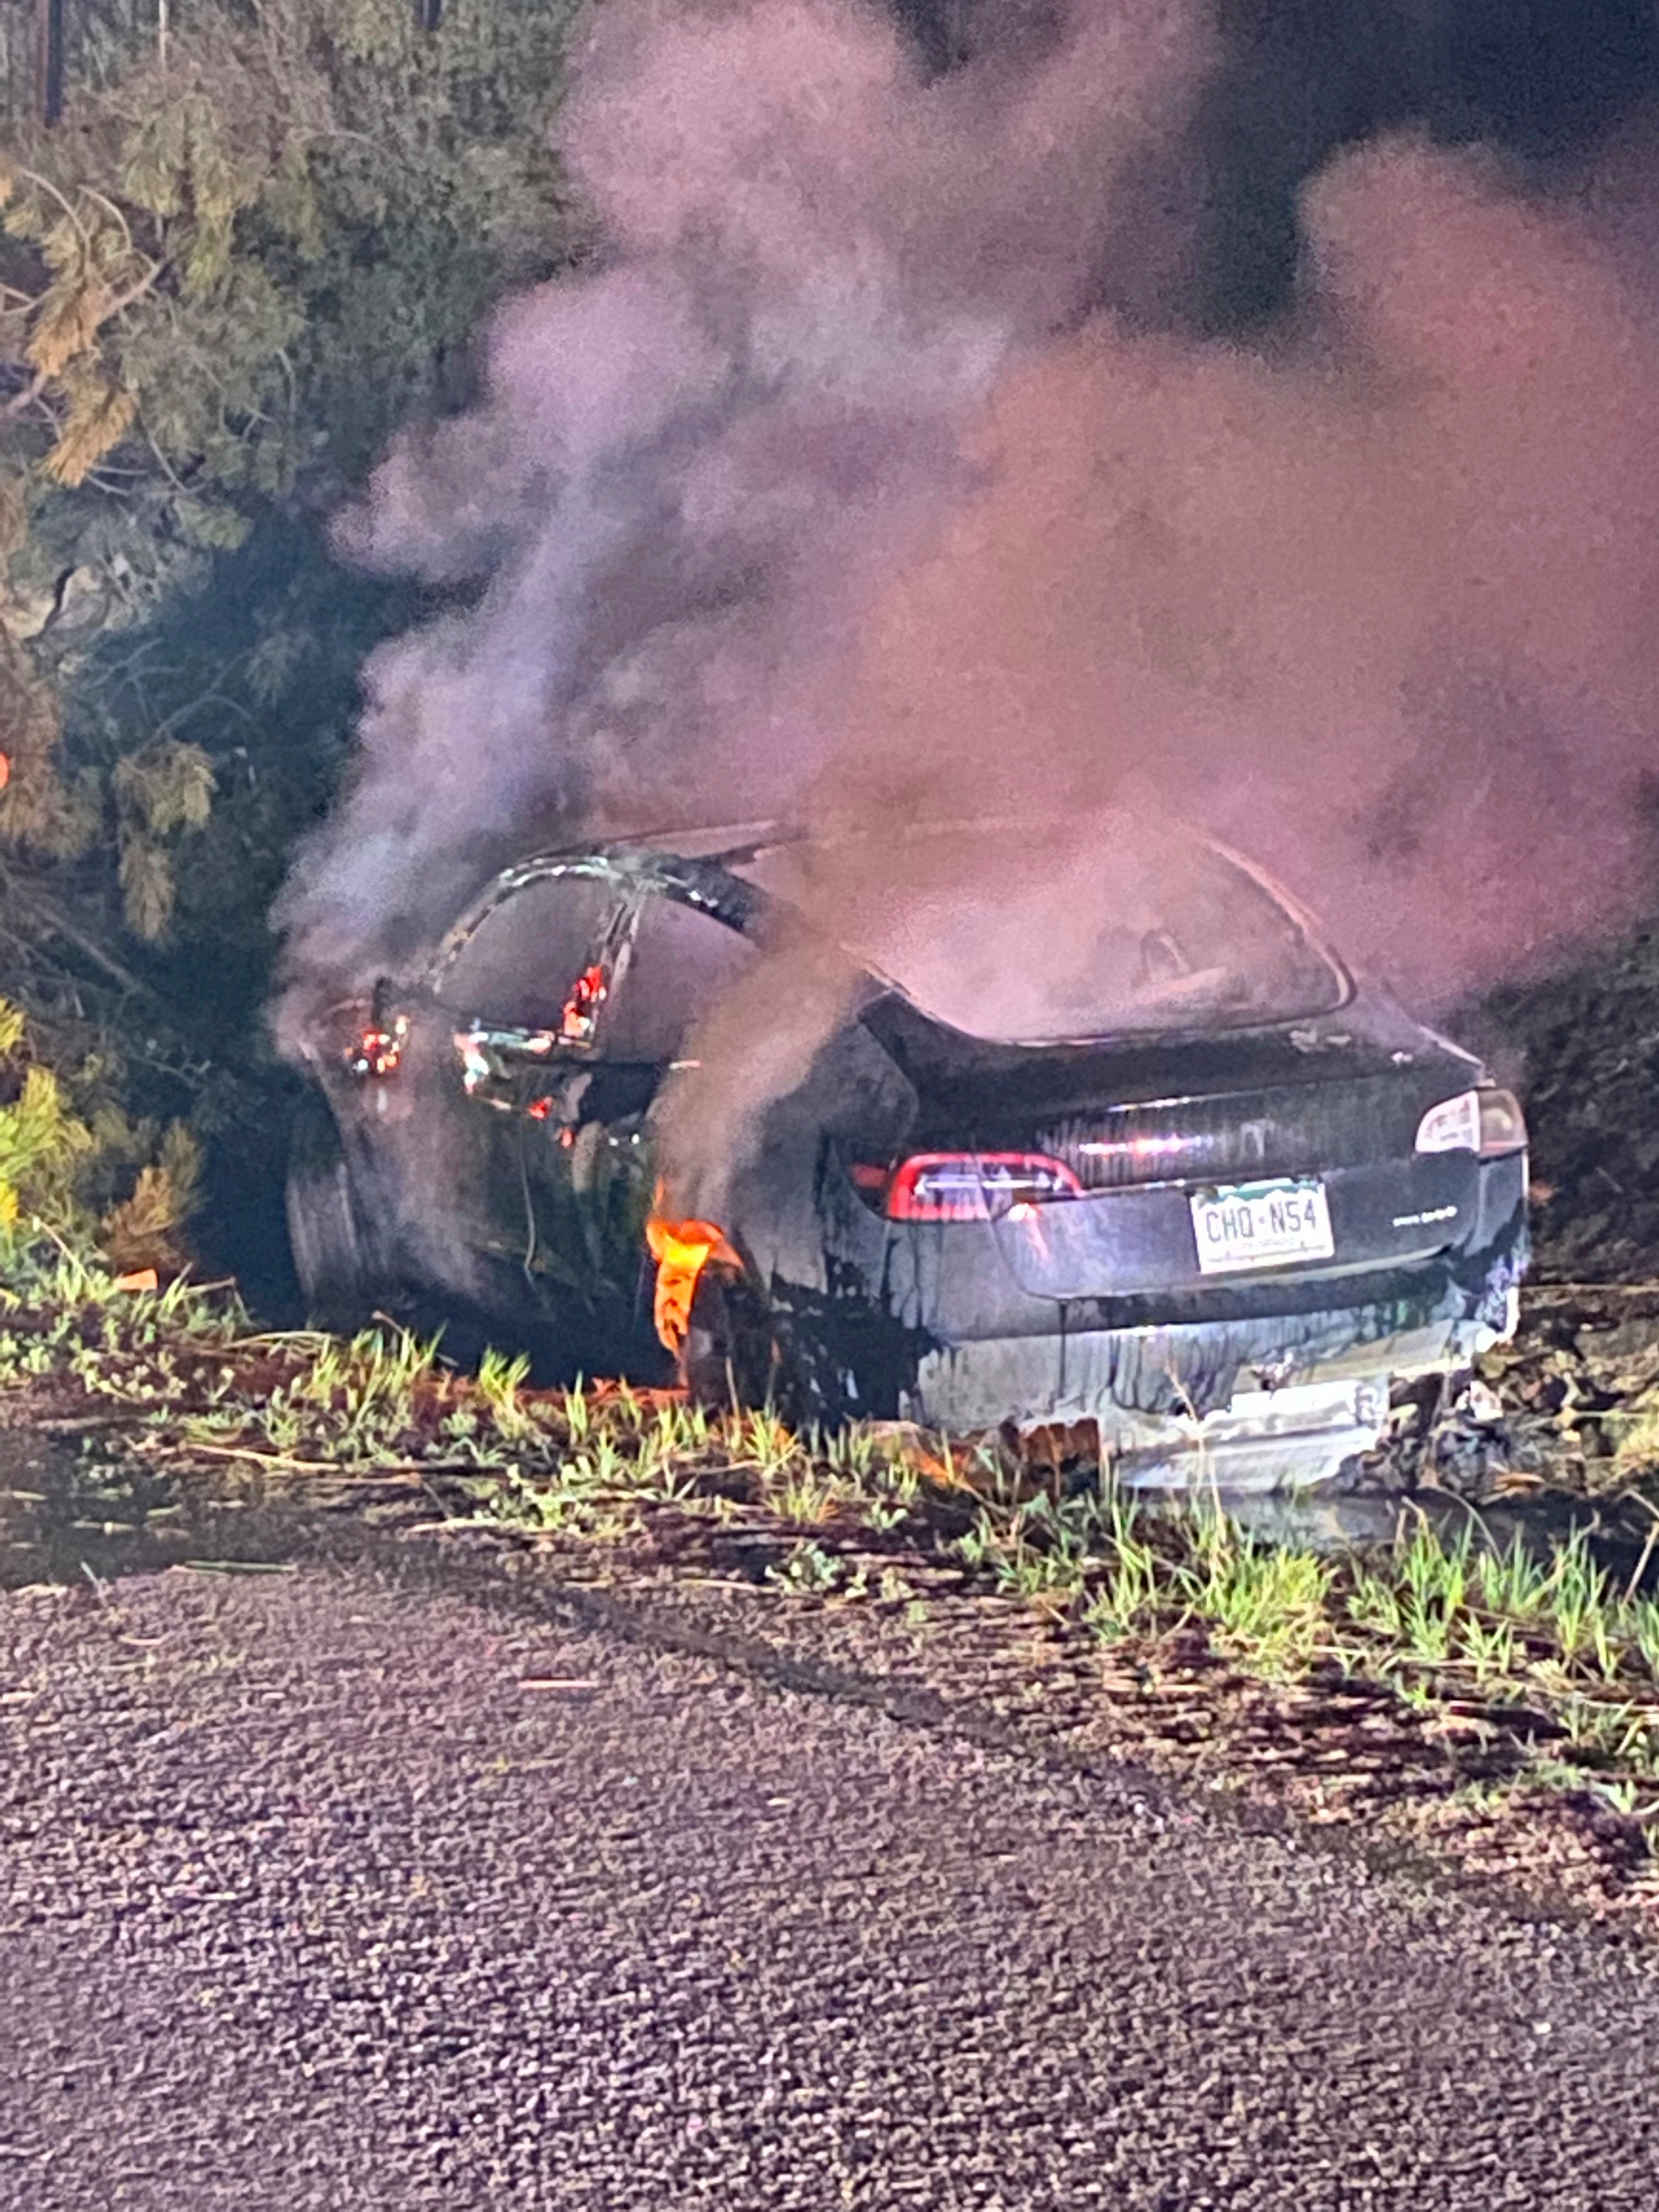 This image provided by Colorado State Patrol shows a Tesla Model 3 that crashed on May 16, 2022 in Clear Creek County, Colorado